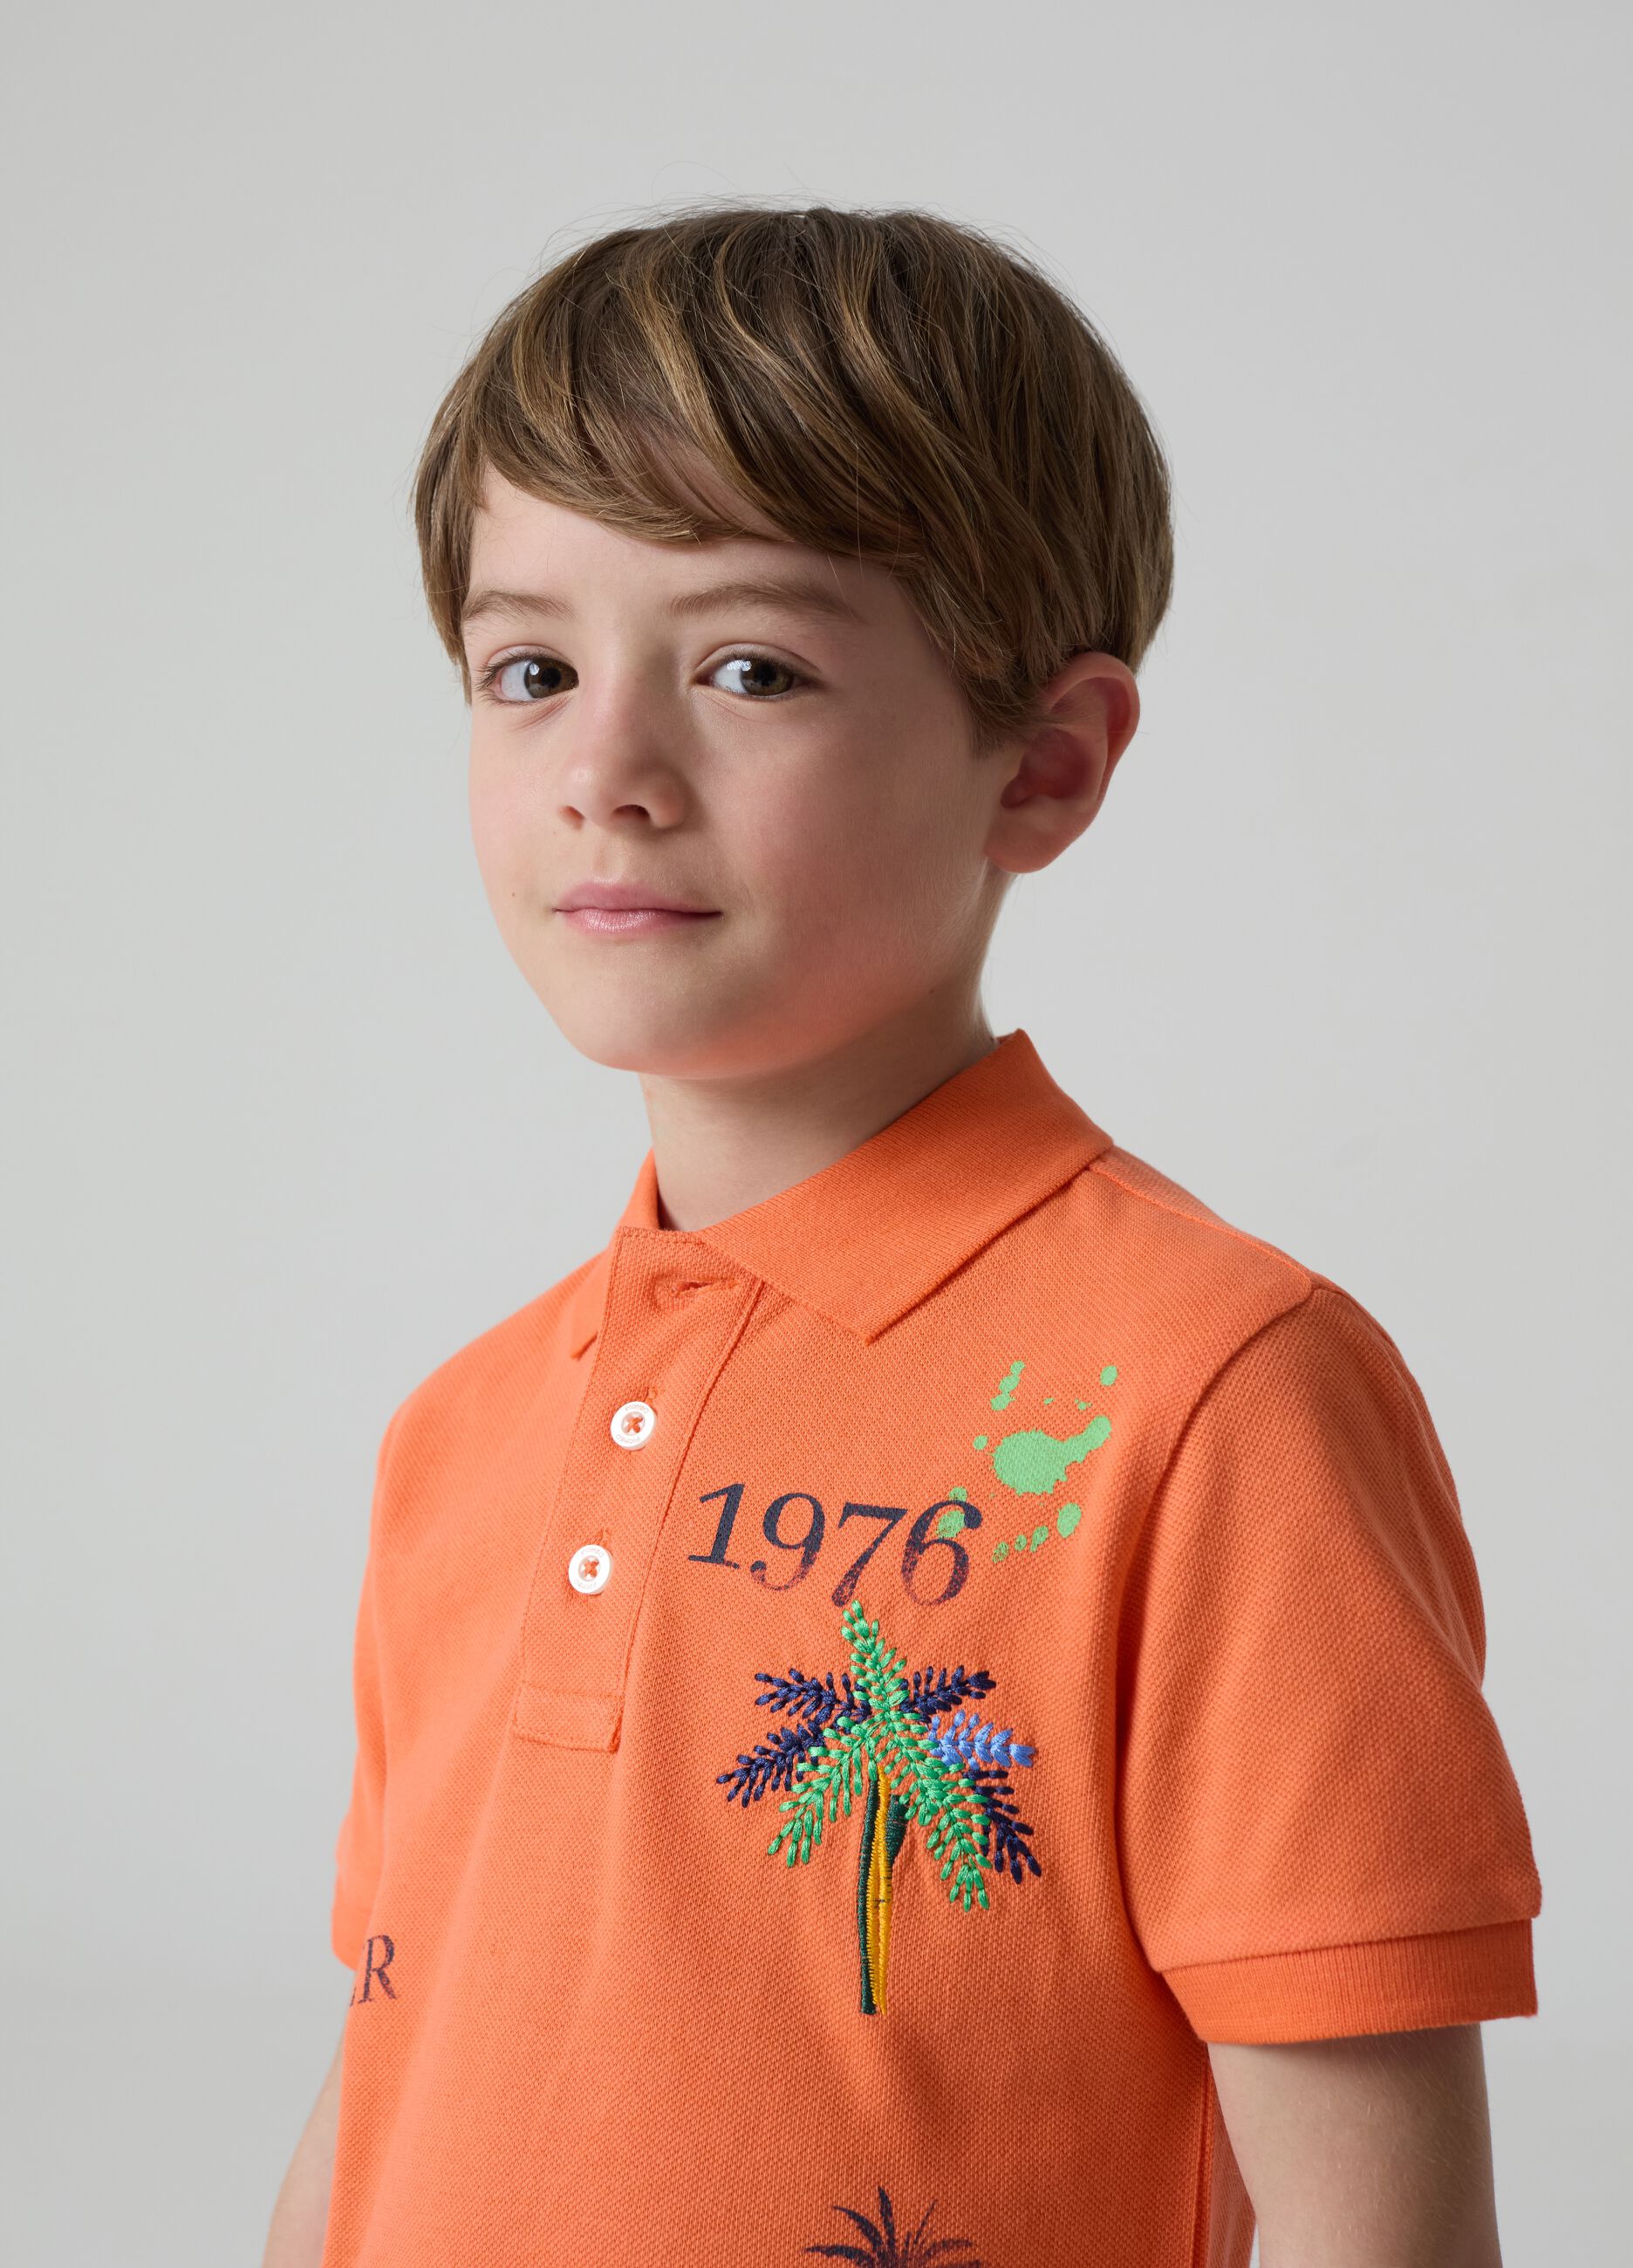 Piquet polo shirt with print and embroidery